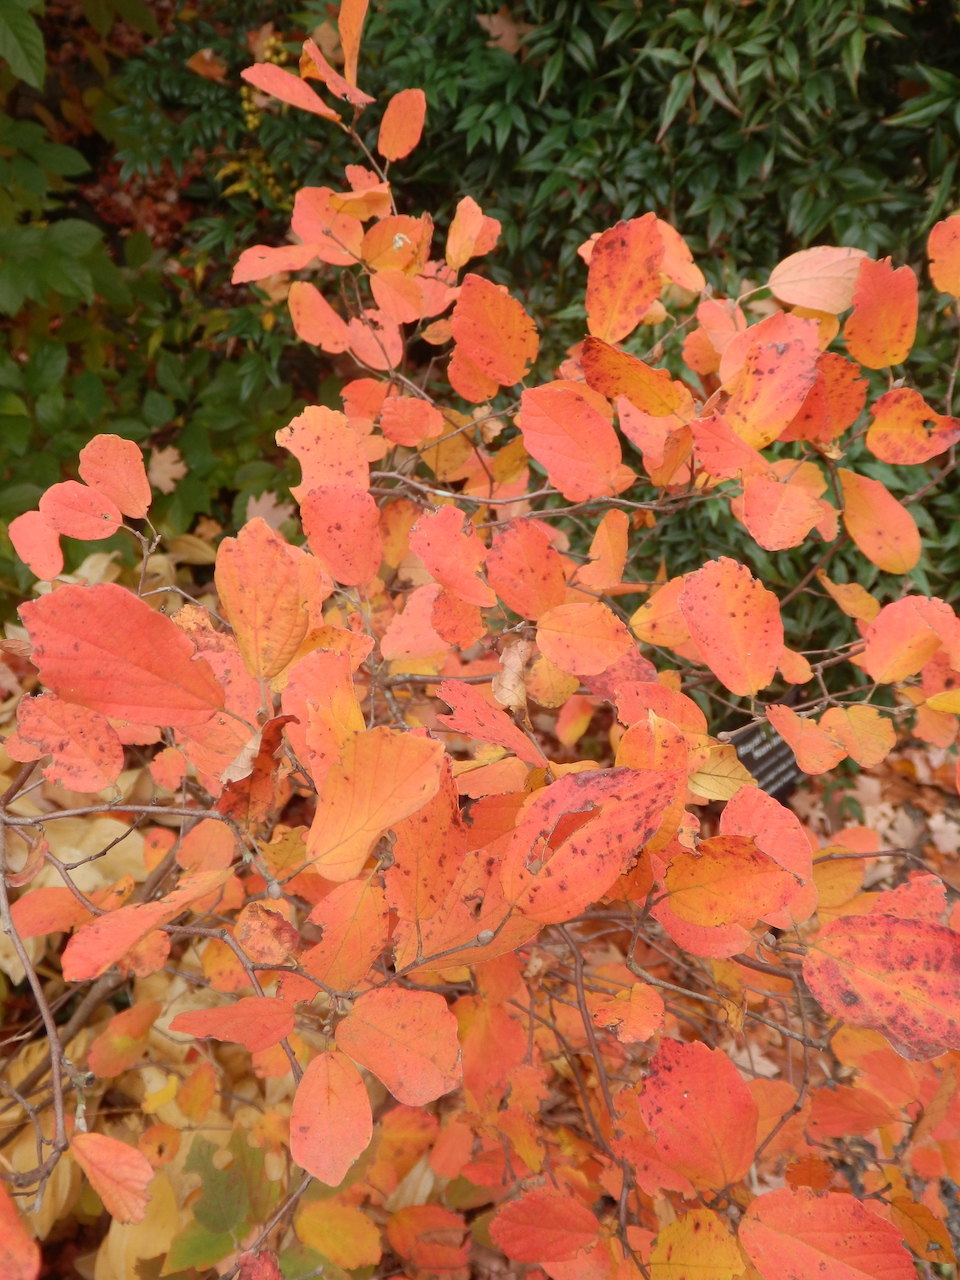 The Scientific Name is Fothergilla gardenii. You will likely hear them called Coastal Witch-alder, Dwarf Fothergilla. This picture shows the Beautiful Fall color of Fothergilla gardenii